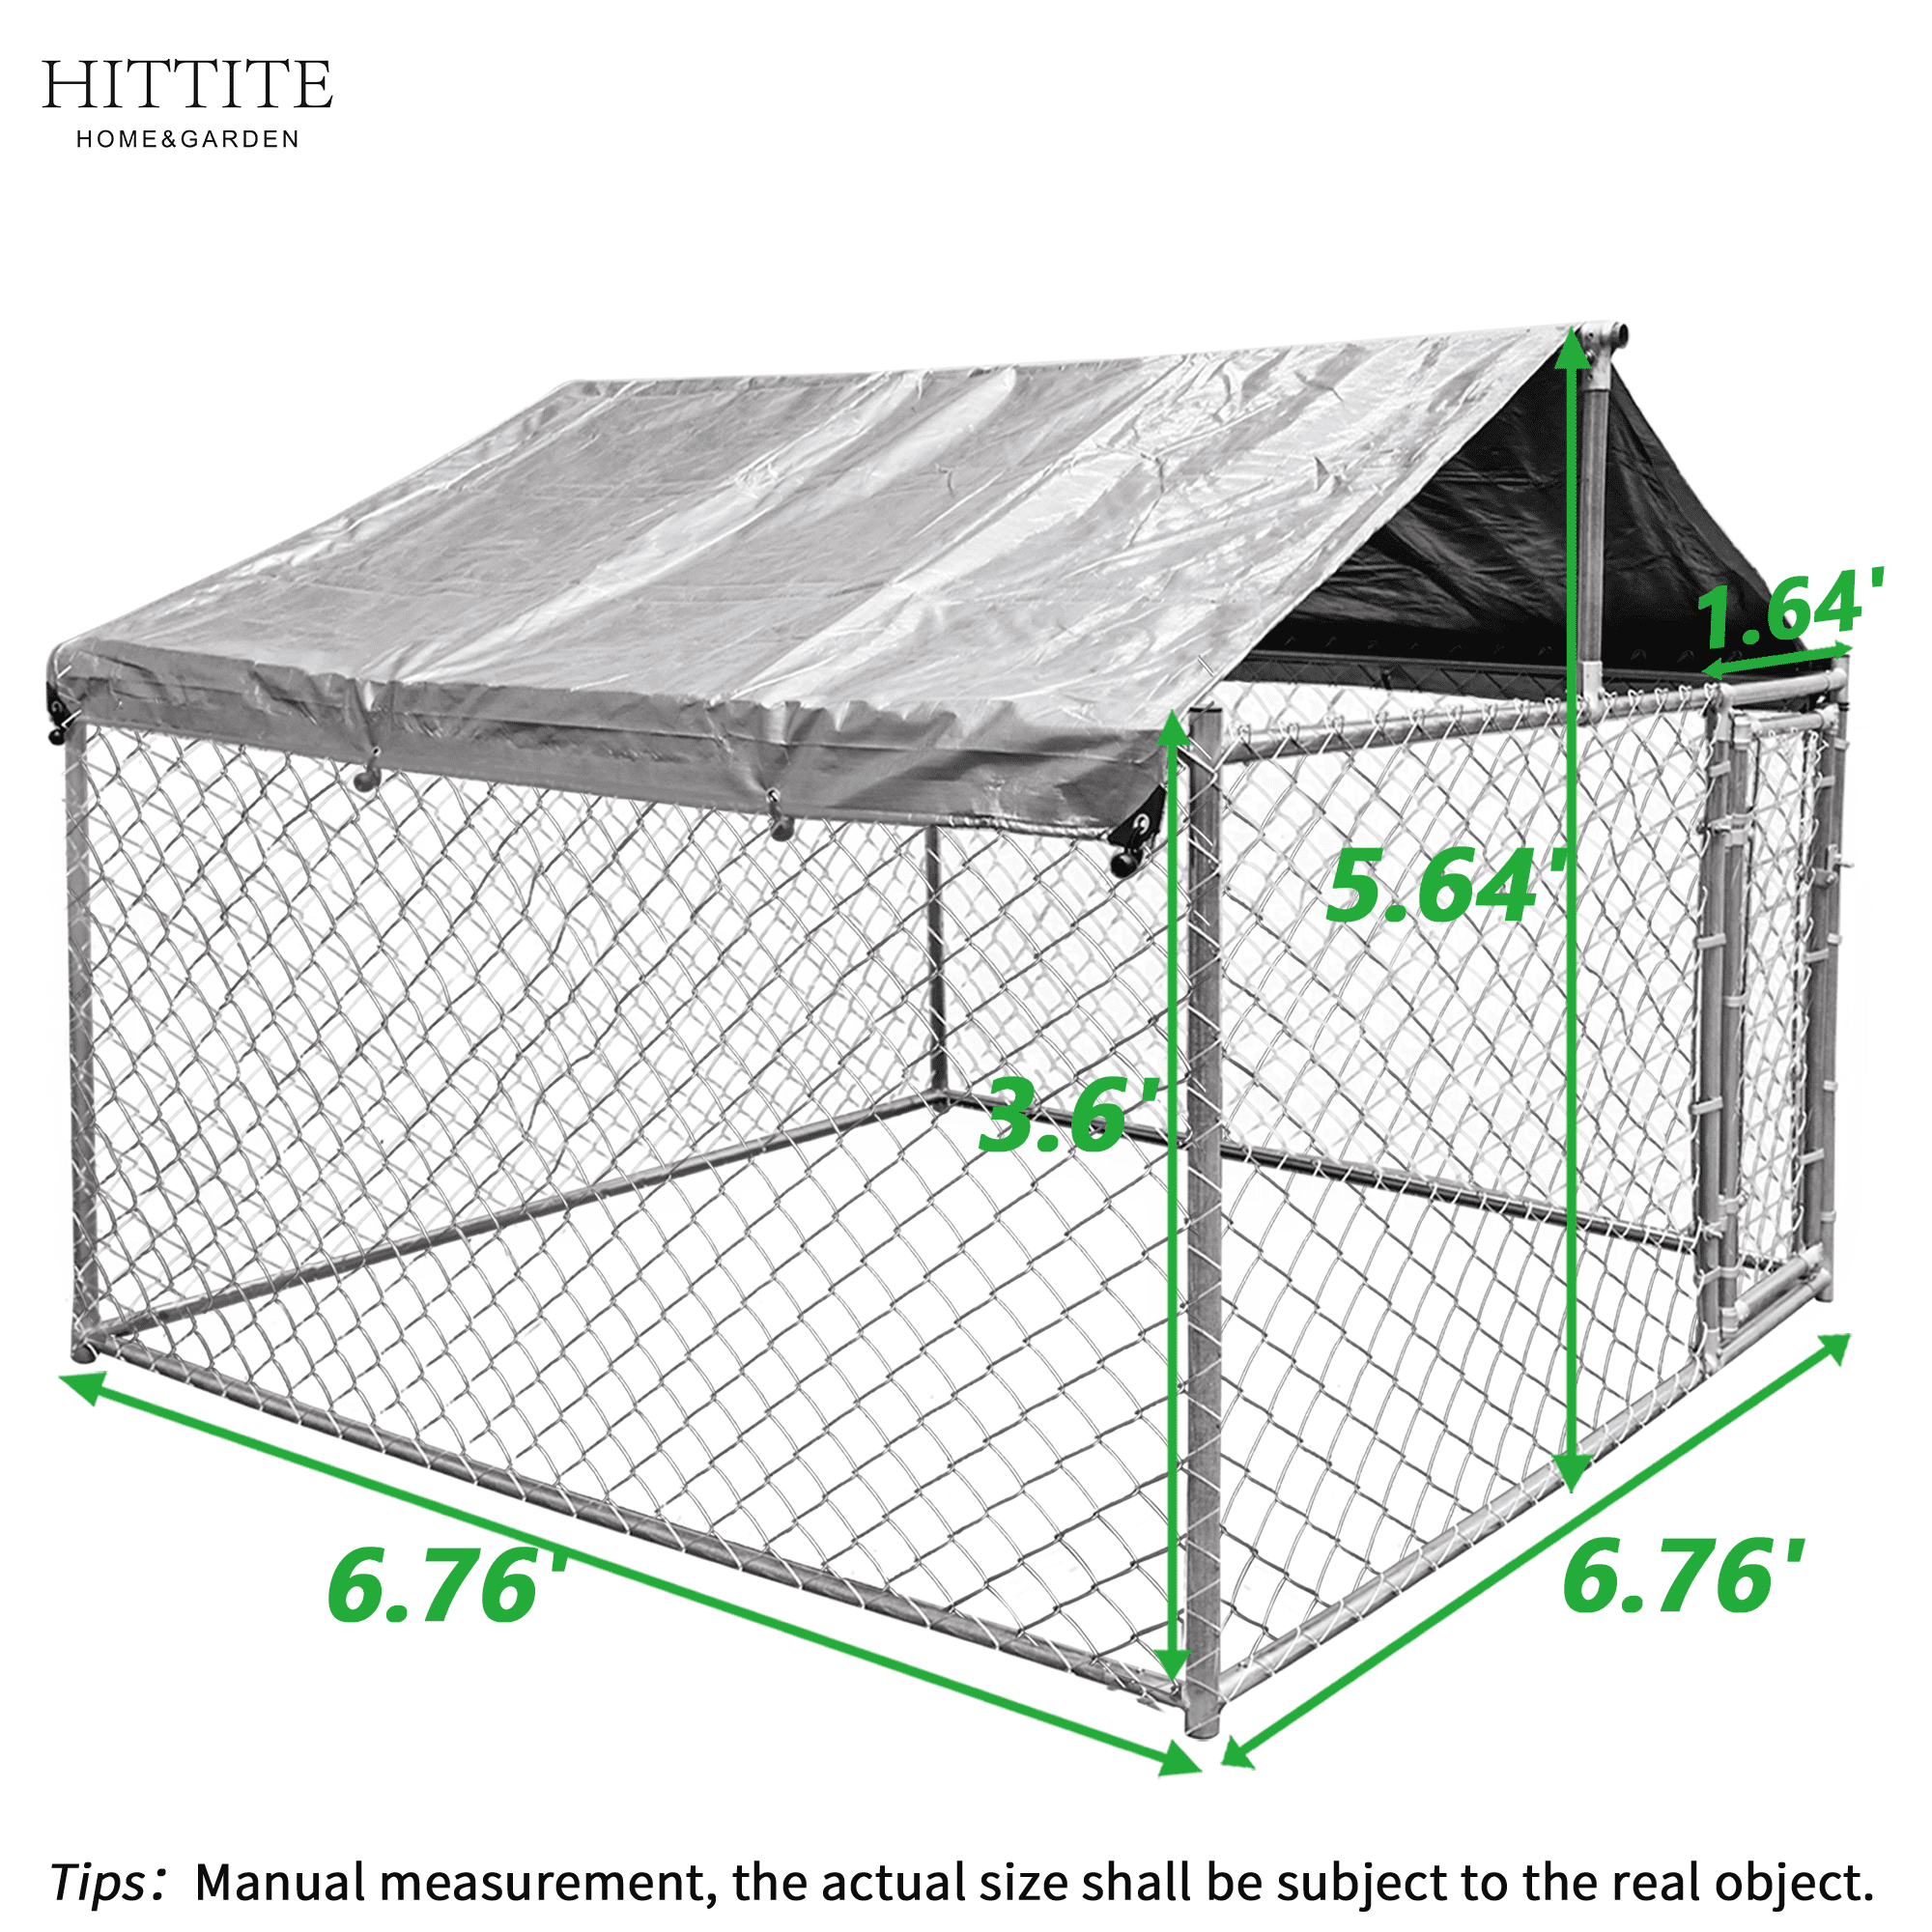 HITTITE Large Outdoor Dog Kennel， Heavy Duty Outdoor Fence Dog Cage， Anti-Rust Dog Pens Outdoor Dog Fence with Waterproof UV-Resistant Cover and Secure Lock for Backyard 6.76'Lx6.76'Wx5.64'H